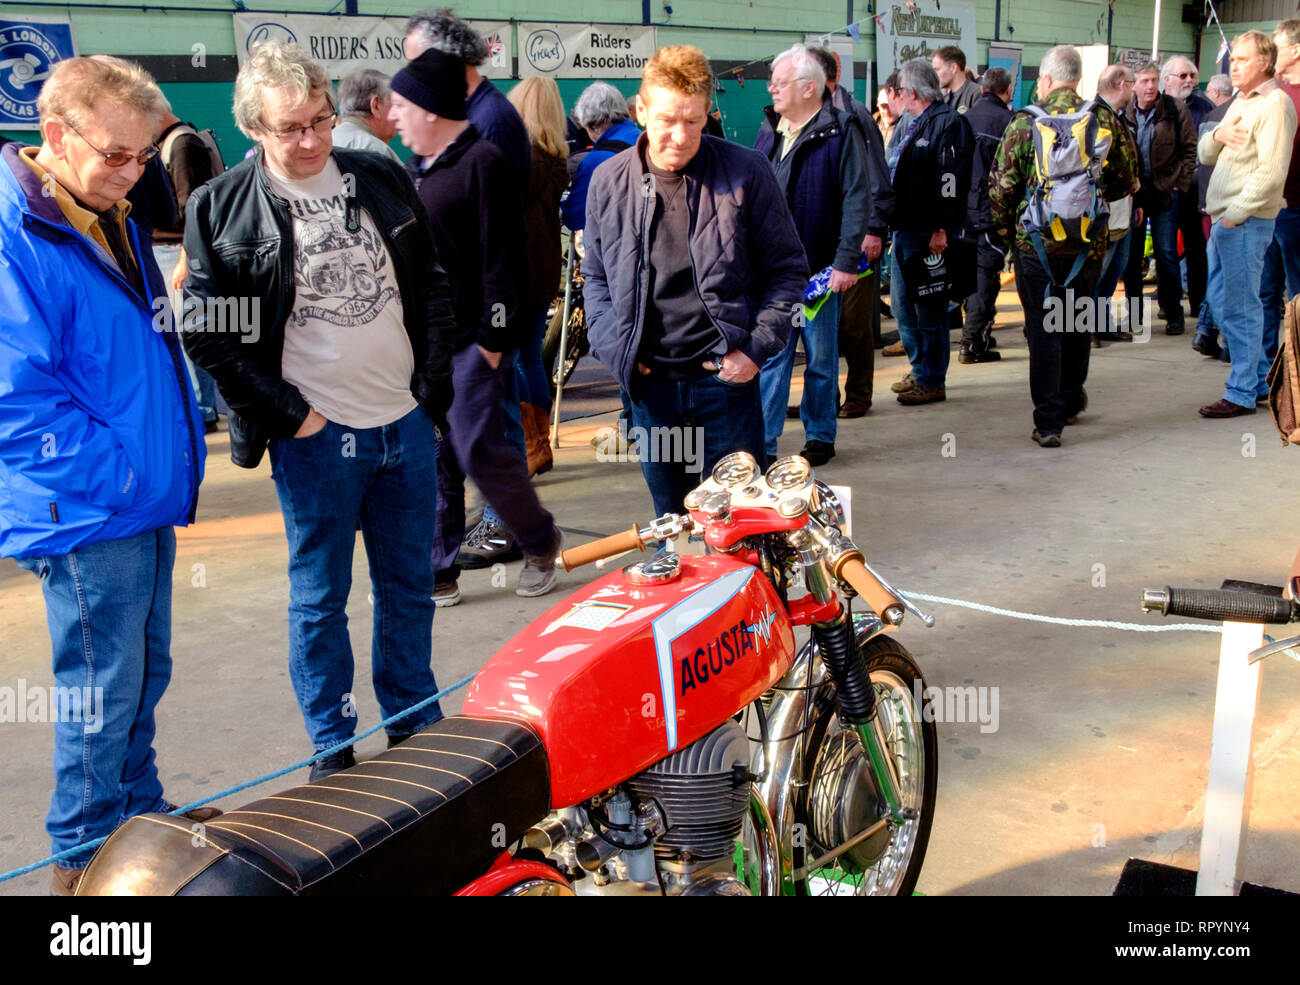 Shepton Mallet, Somerset, UK. 23rd Feb 2019 Motorcycle enthusiasts gather for the first day of the 39th Carol Nash Classic Motorcycle show. Trade stands and individuals showed off their two wheeled treasures. The phrase 'I had one like that' was overheard many times as the friendly and welcoming atmosphere revved up the nostalgia. ©Alamy Live News / Mr Standfast Credit: Mr Standfast/Alamy Live News Stock Photo